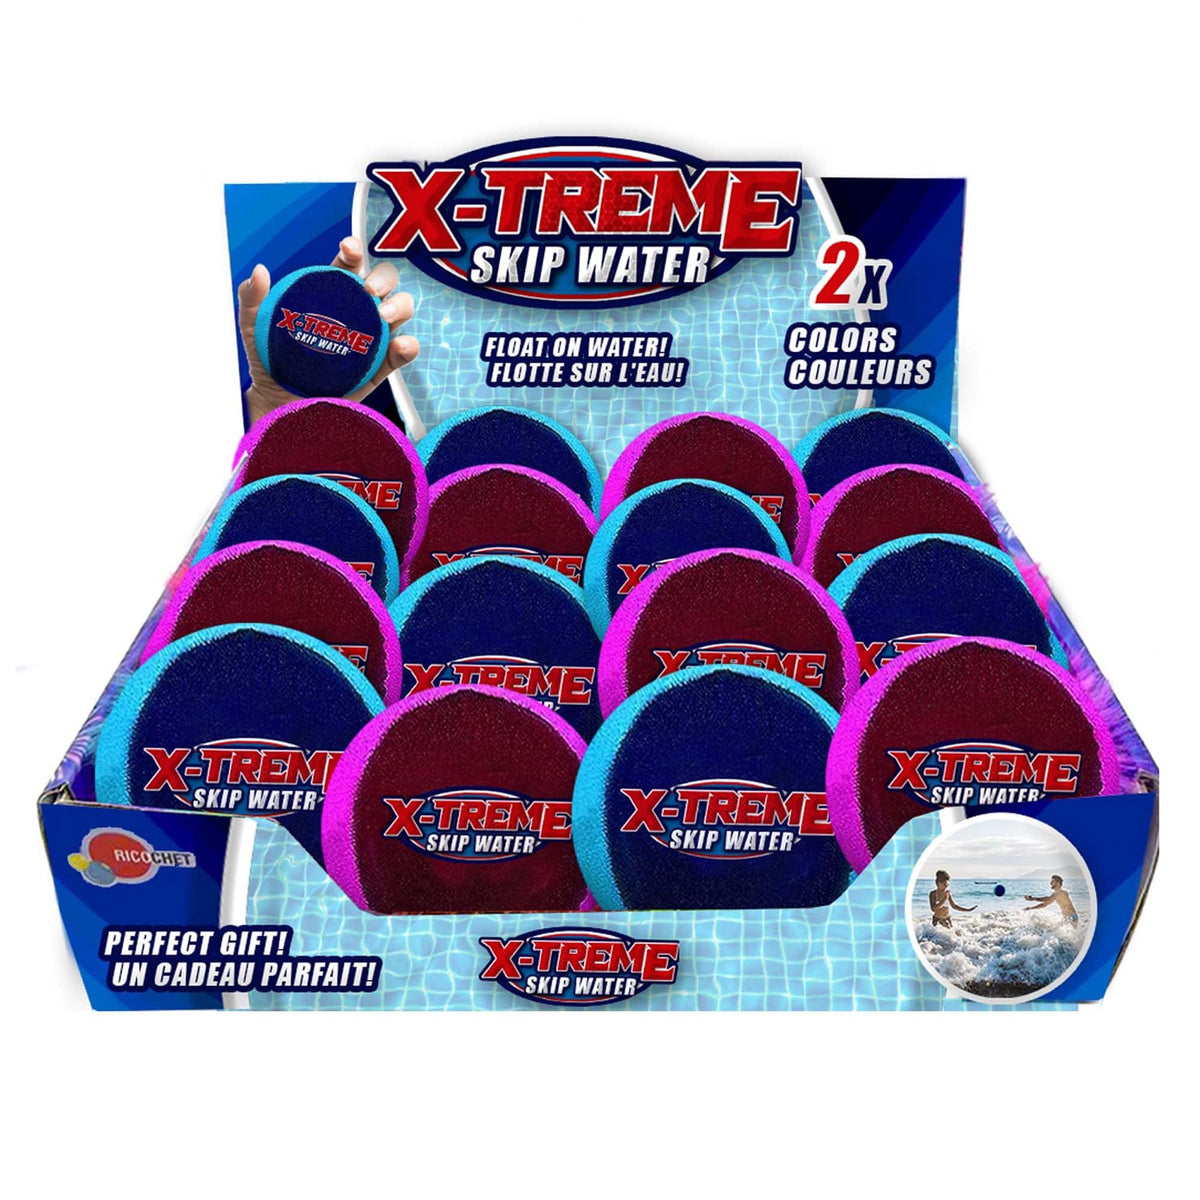 GROUPE RICOCHET impulse buying Extreme Skip Water Ball, Assortment, 1 Count